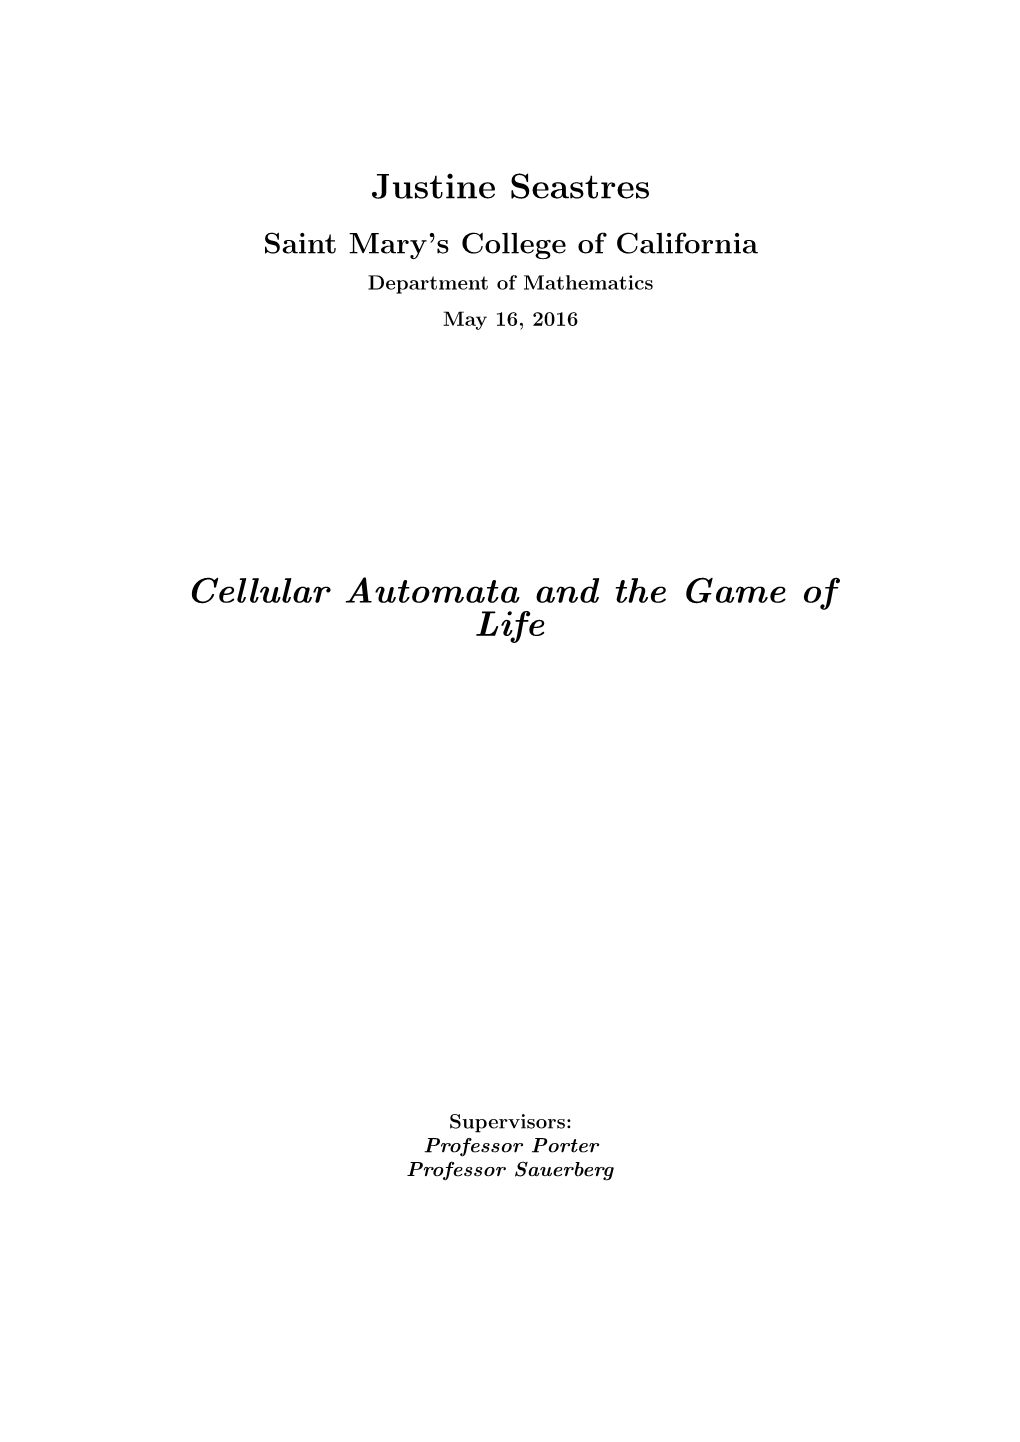 Justine Seastres Cellular Automata and the Game of Life